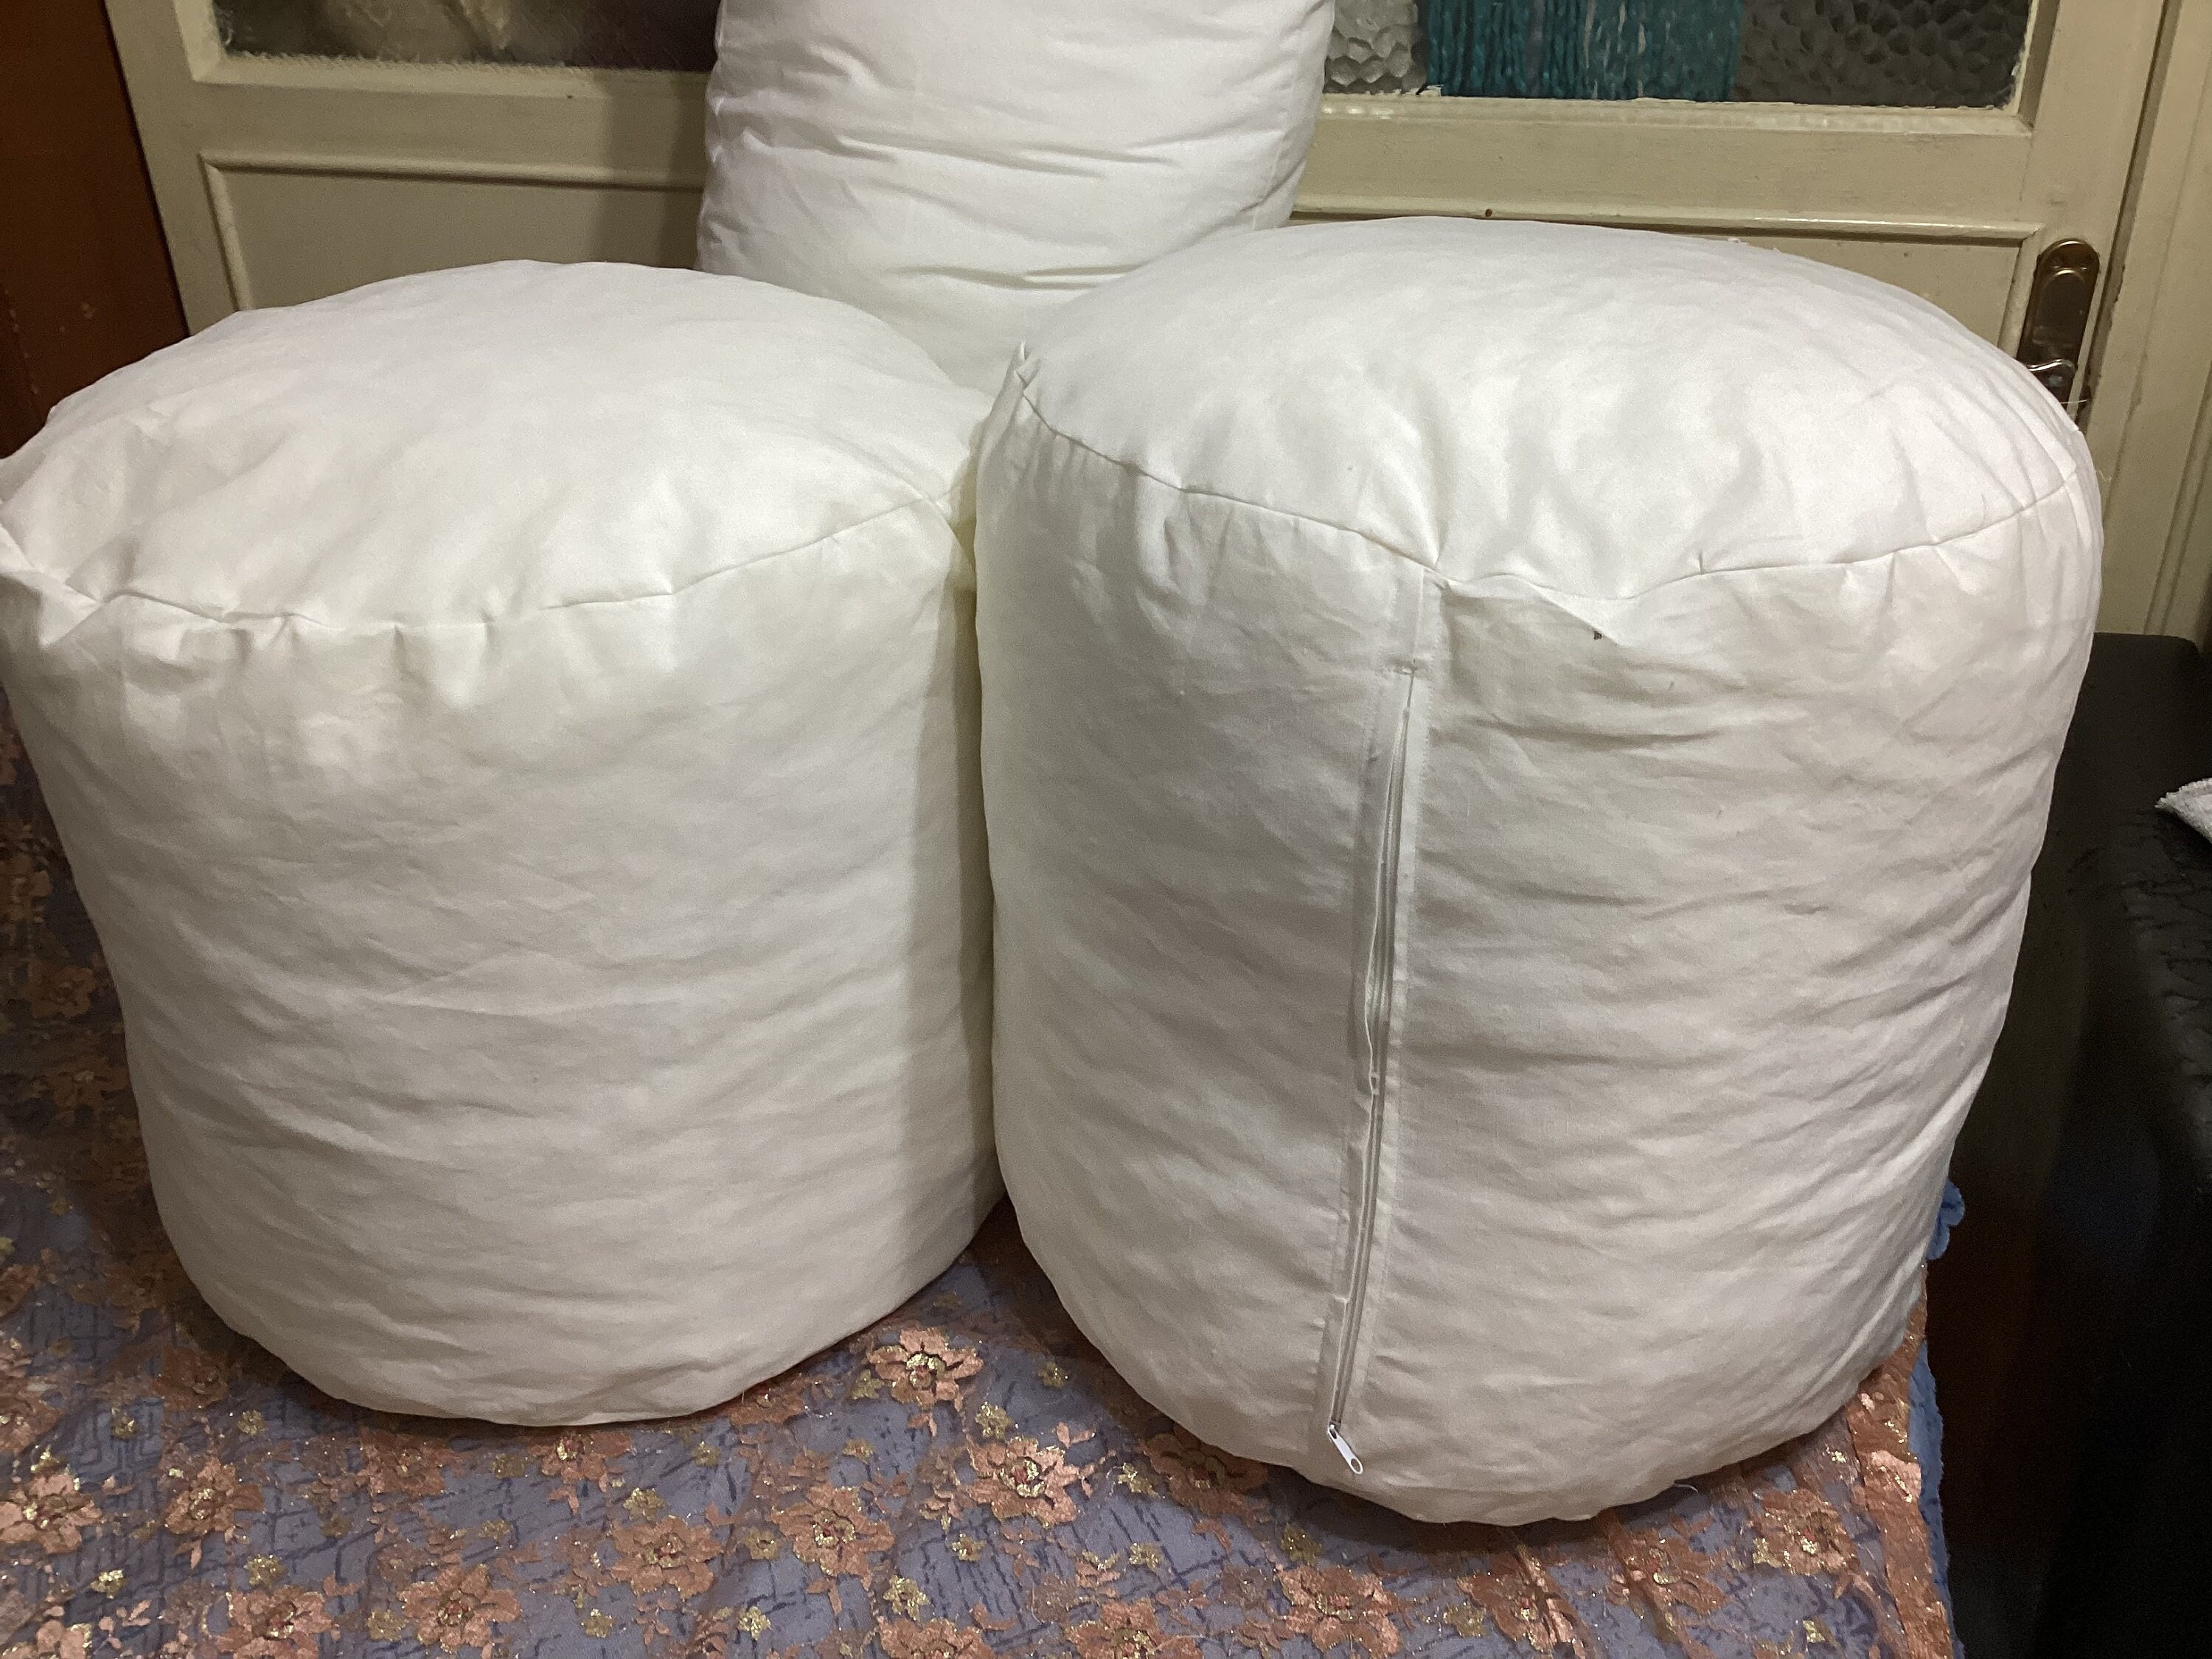 Moroccan Pouf, How To Fill Your Moroccan Pouf - 3 Ways